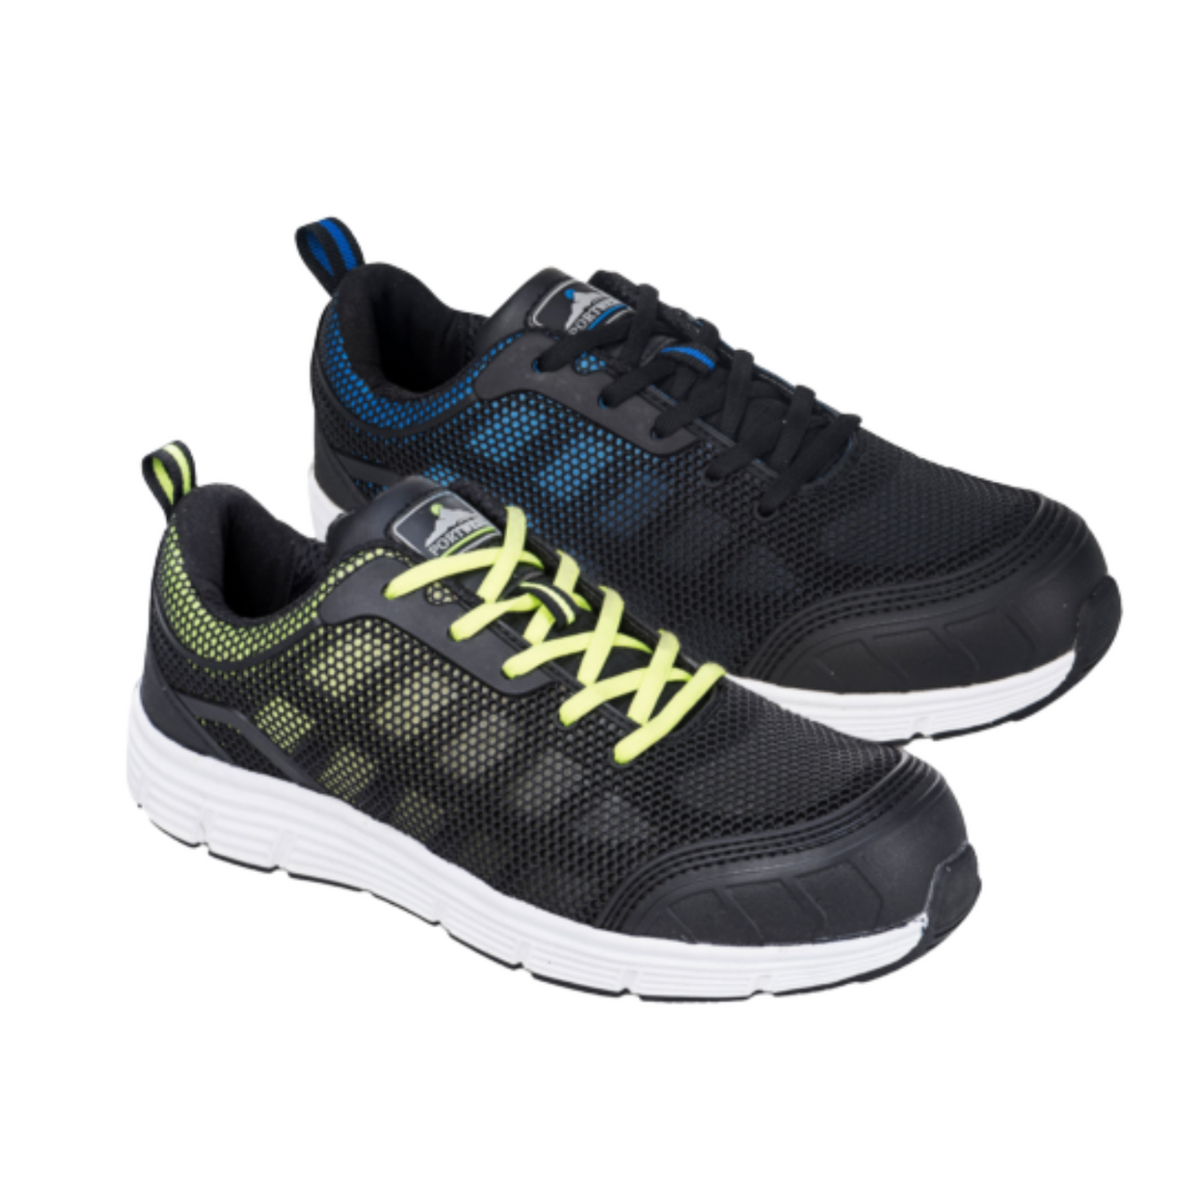 Portwest Steelite Tove Trainer Shoe S1P Lightweight Safety Protection FT15-Collins Clothing Co